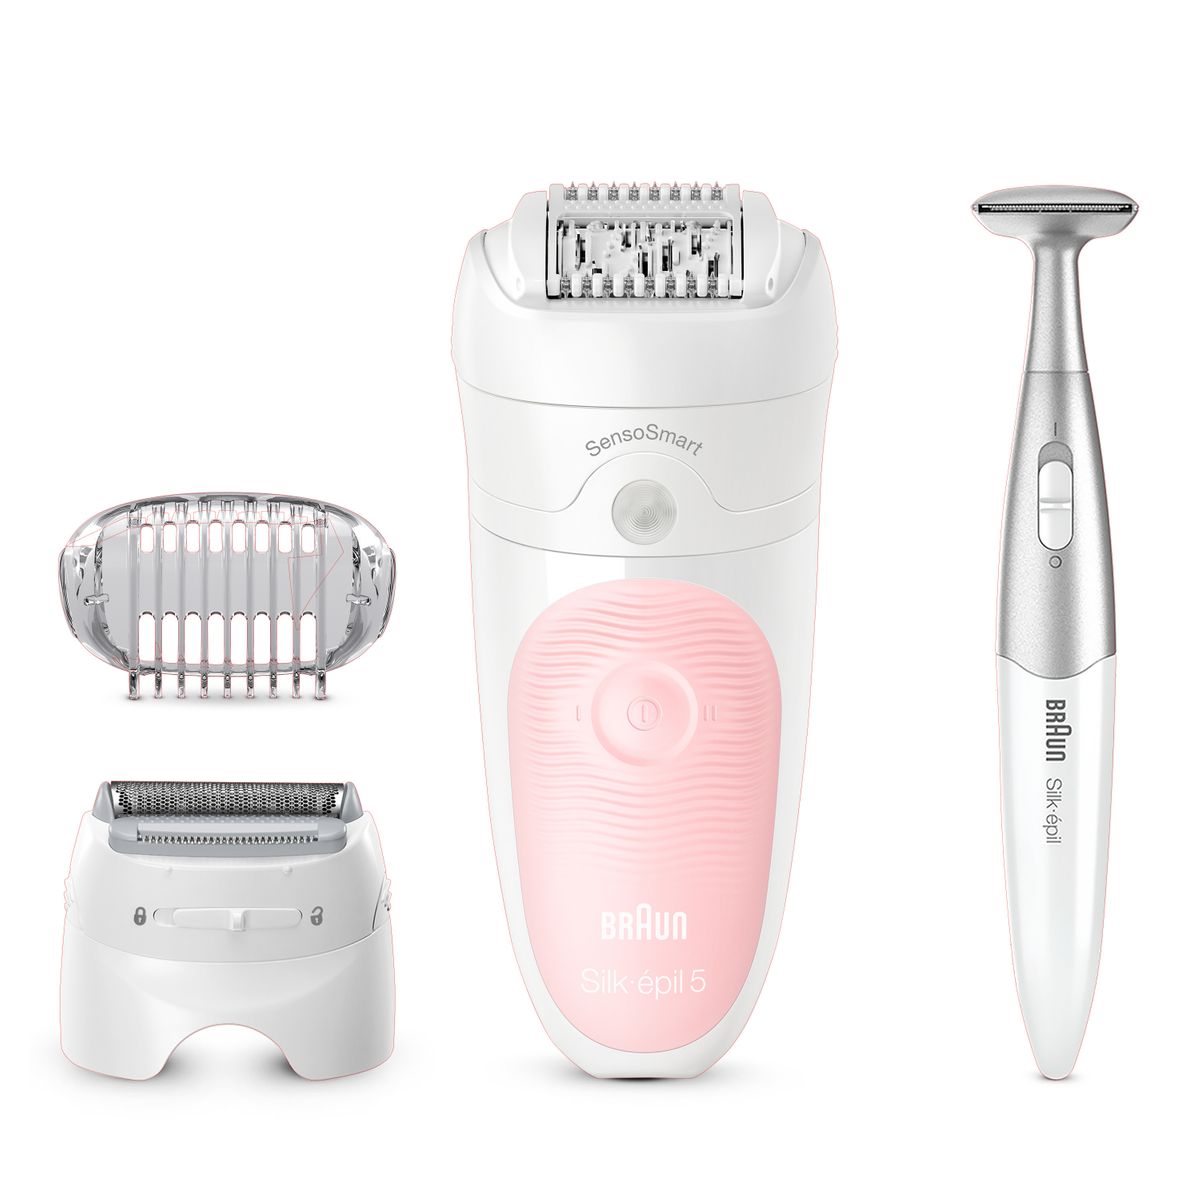 Braun Silk-epil 5 beauty set, epilator ladies for hair removal, attachments for shaver, trimmer and massage for body, incl. bikini trimmer, bag, gift for women, flamingo 5-820 single.